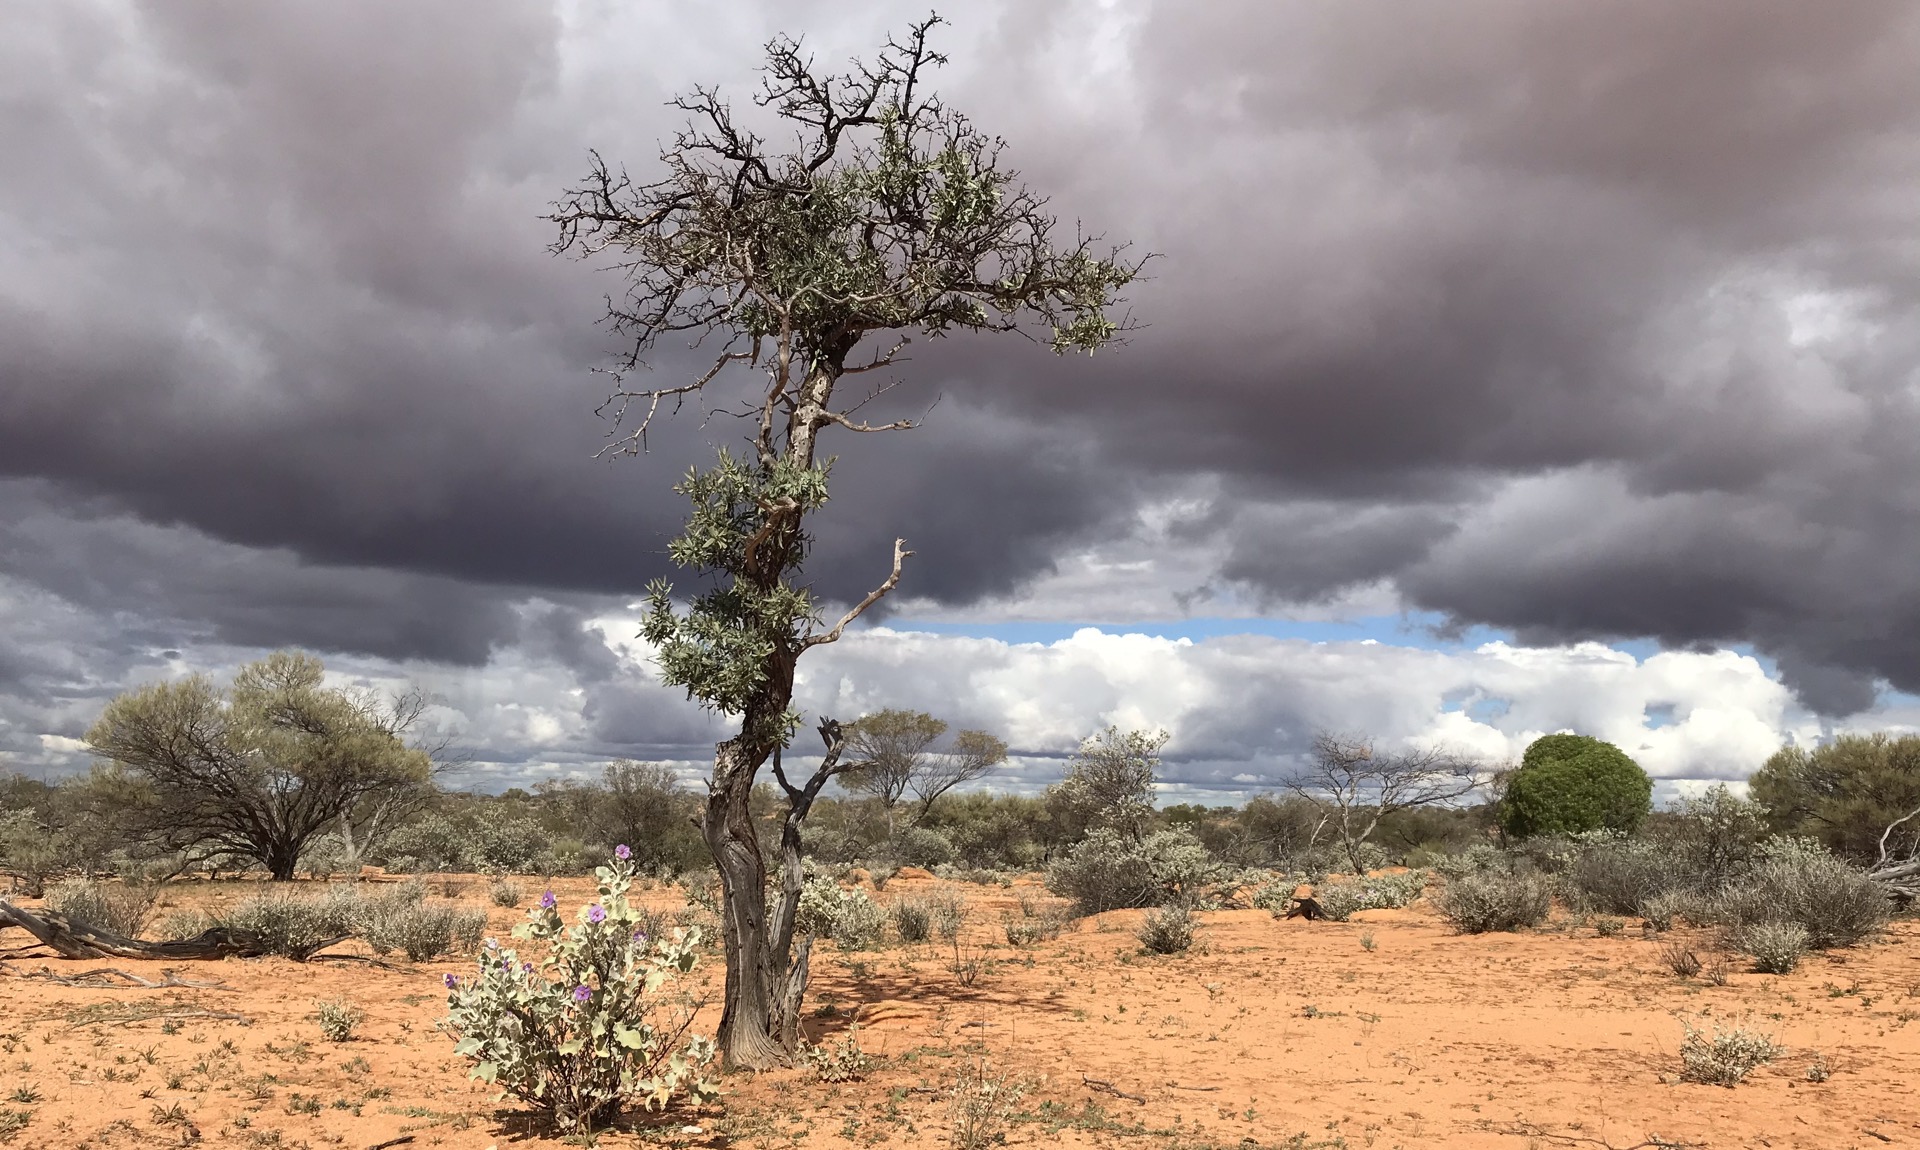 Photo of a gnarled sandalwood tree standing alone on a plain, under a cloudy sky